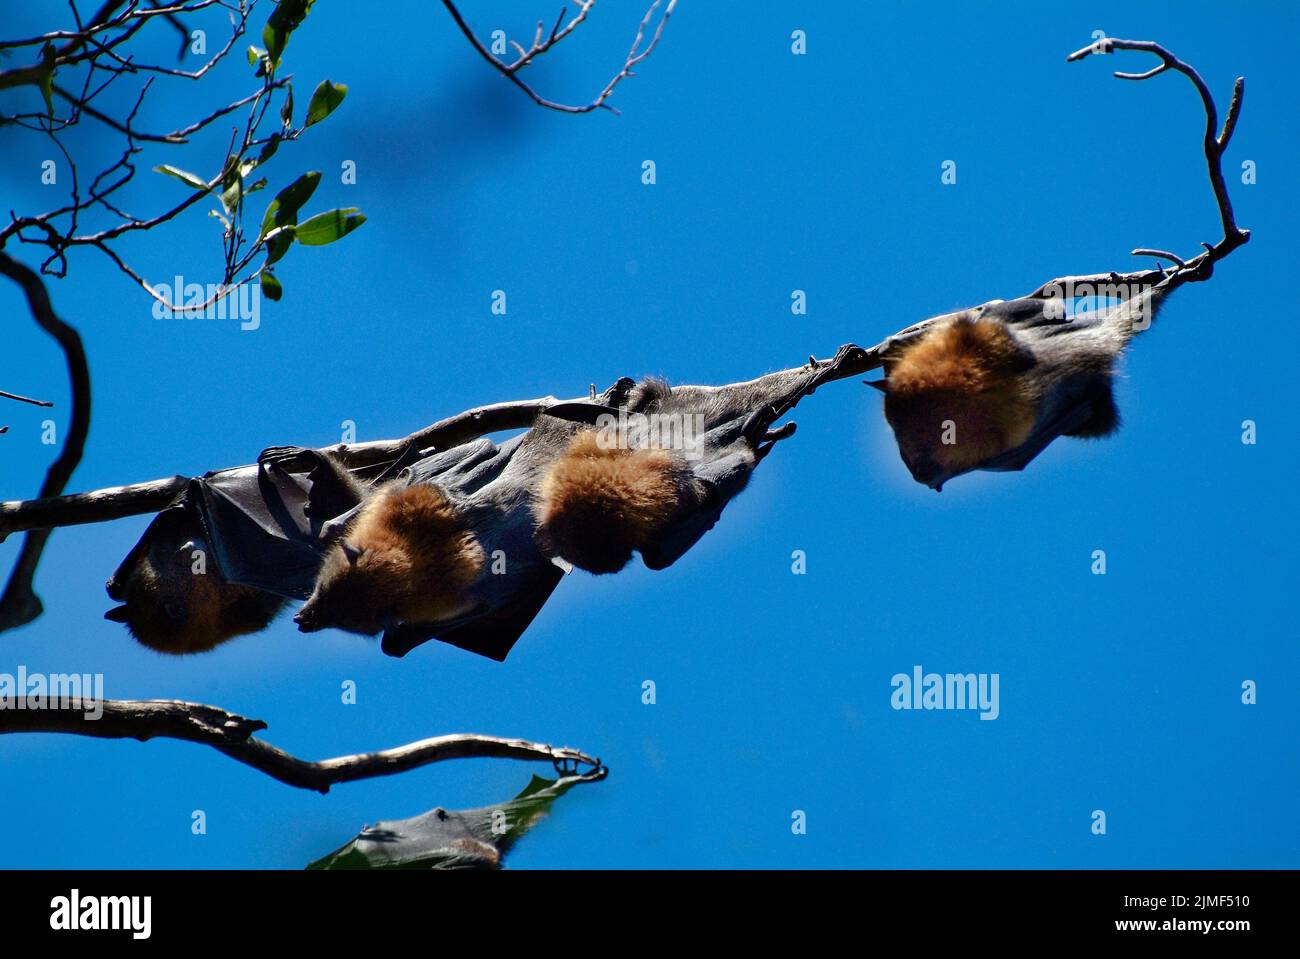 Australia, Flying foxes on a branch in public royal botanical garden Stock Photo